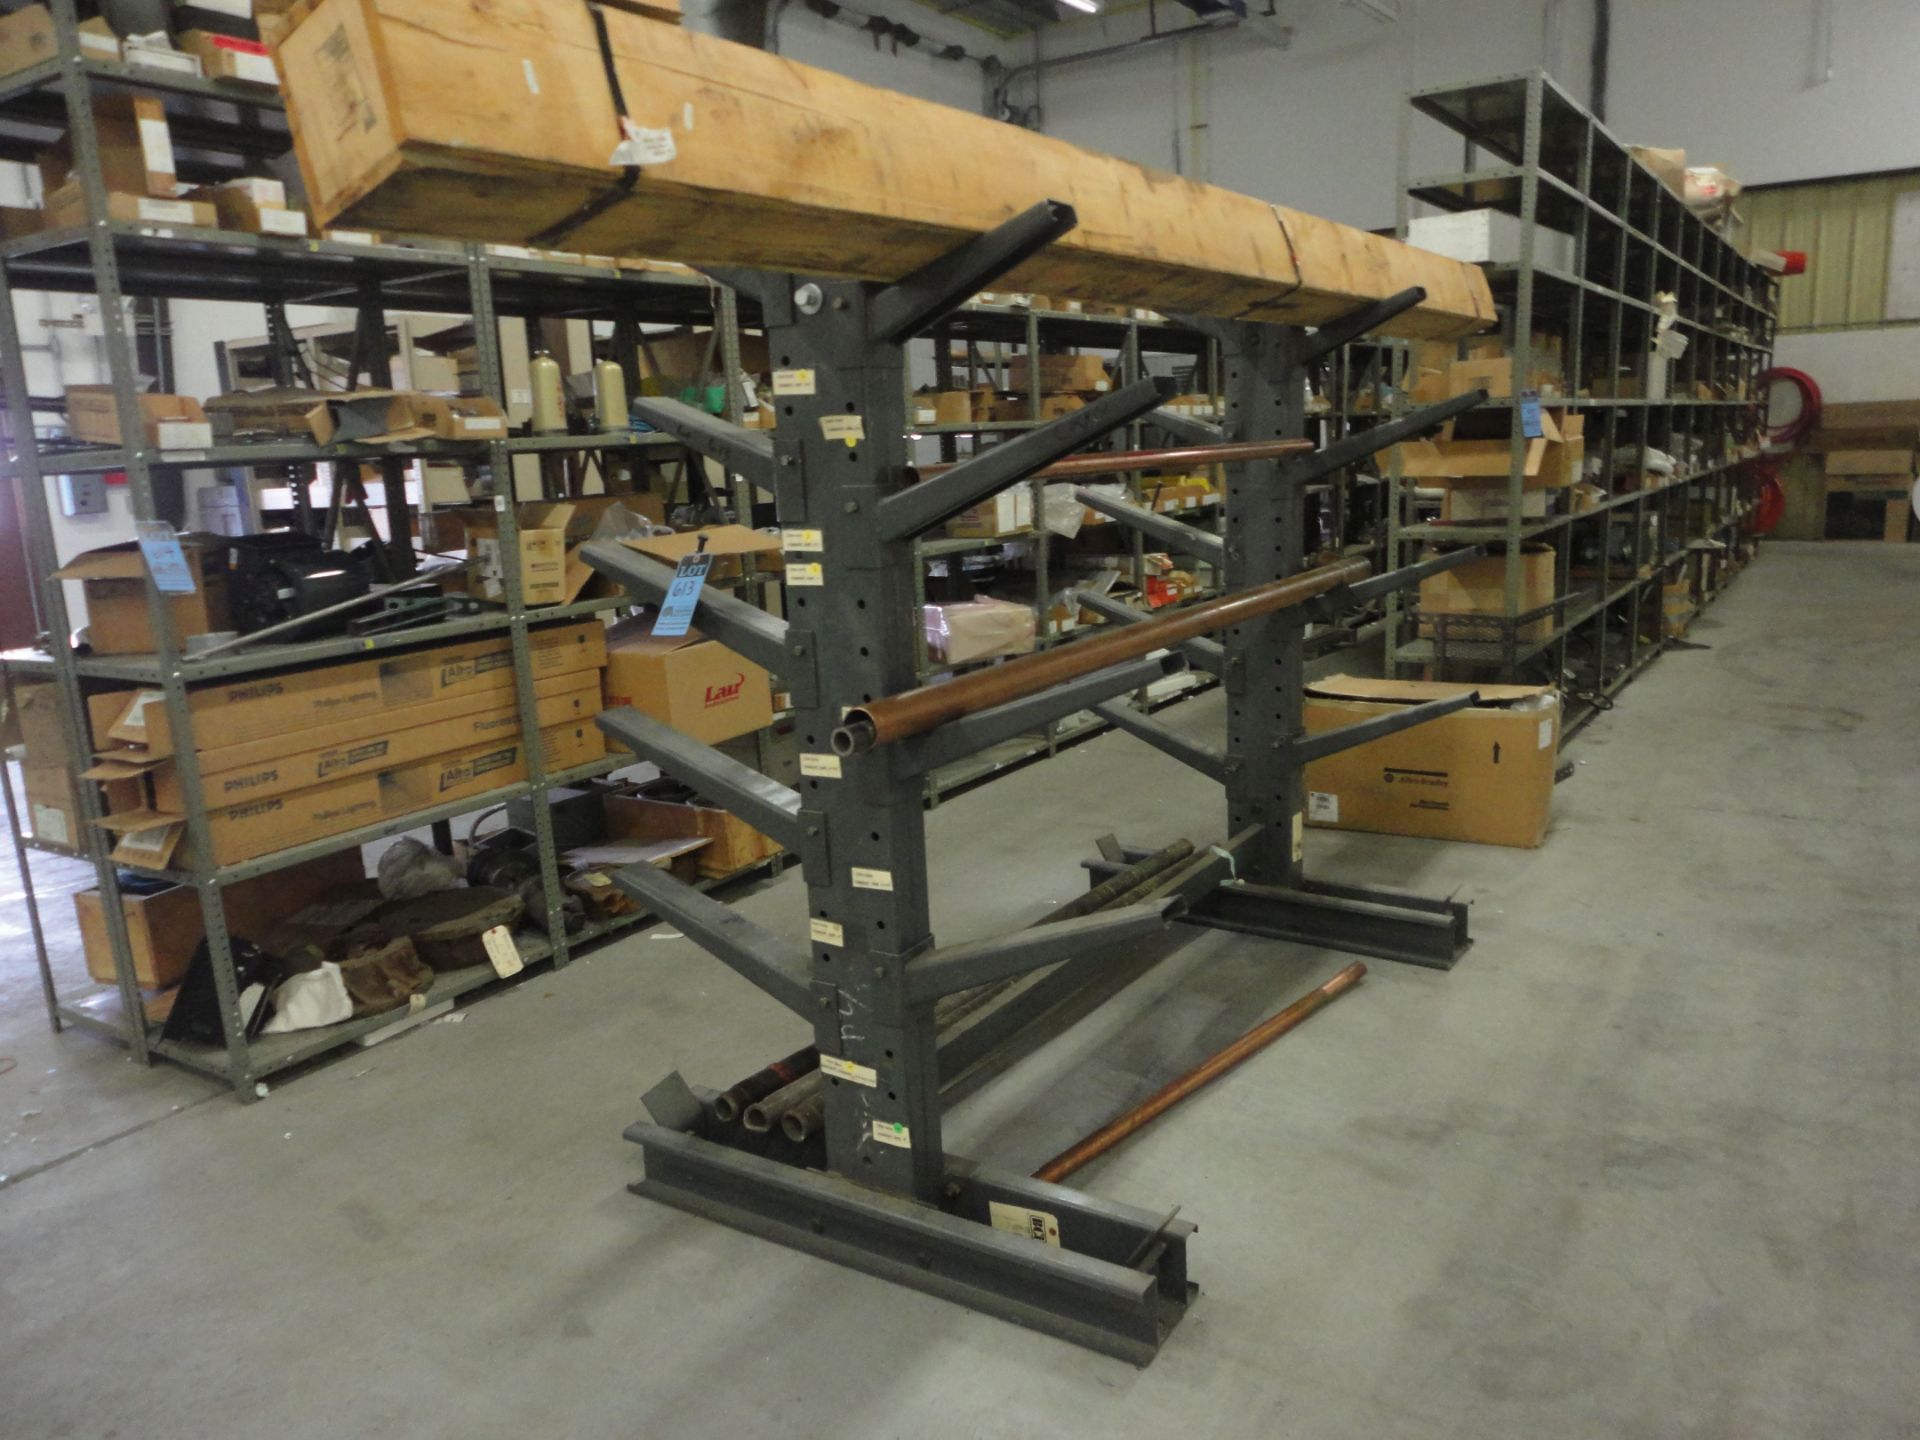 SECTIONS 16"-19" ARMS X 76" X 6' HIGH DOUBLE-SIDED CANTILEVER RACK